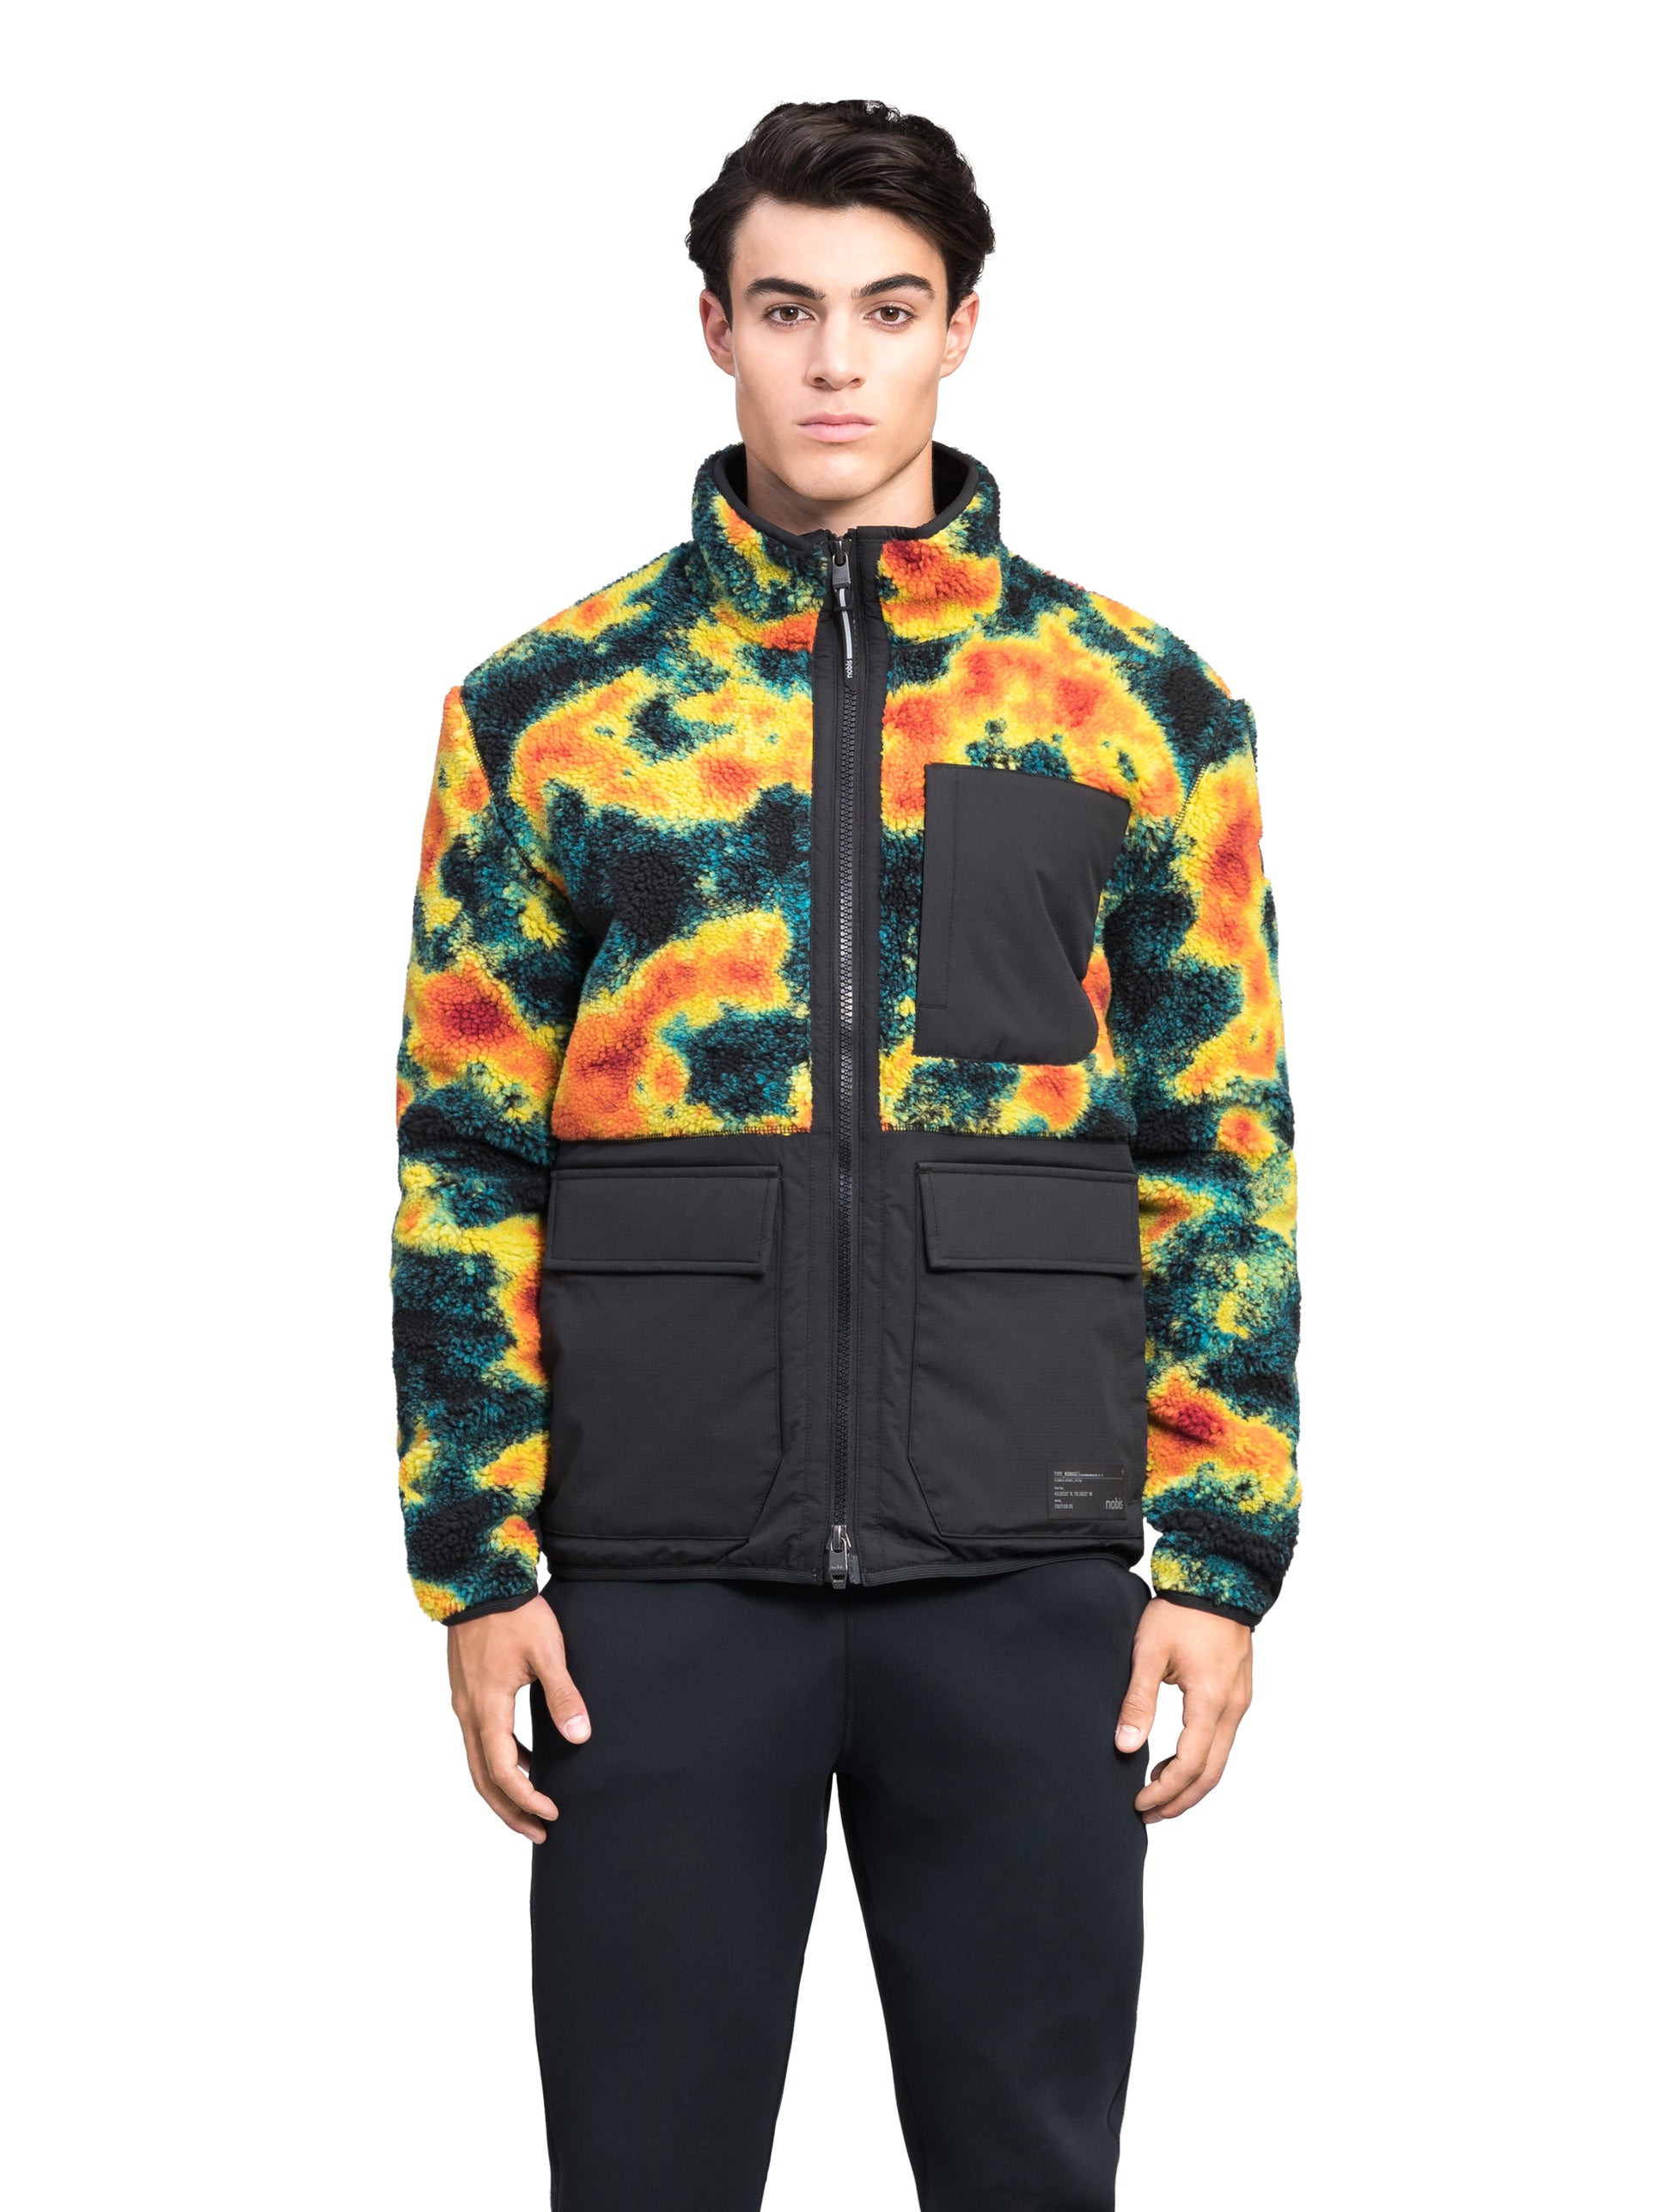 Kepler Men's Berber Zip Front Sweater in hip length, premium berber and stretch ripstop fabrication, Primaloft Gold Insulation Active+, two-way centre-front zipper, zipper pocket at left chest, magnetic closure flap pockets at waist with additional side-entry pockets, in Heat Map